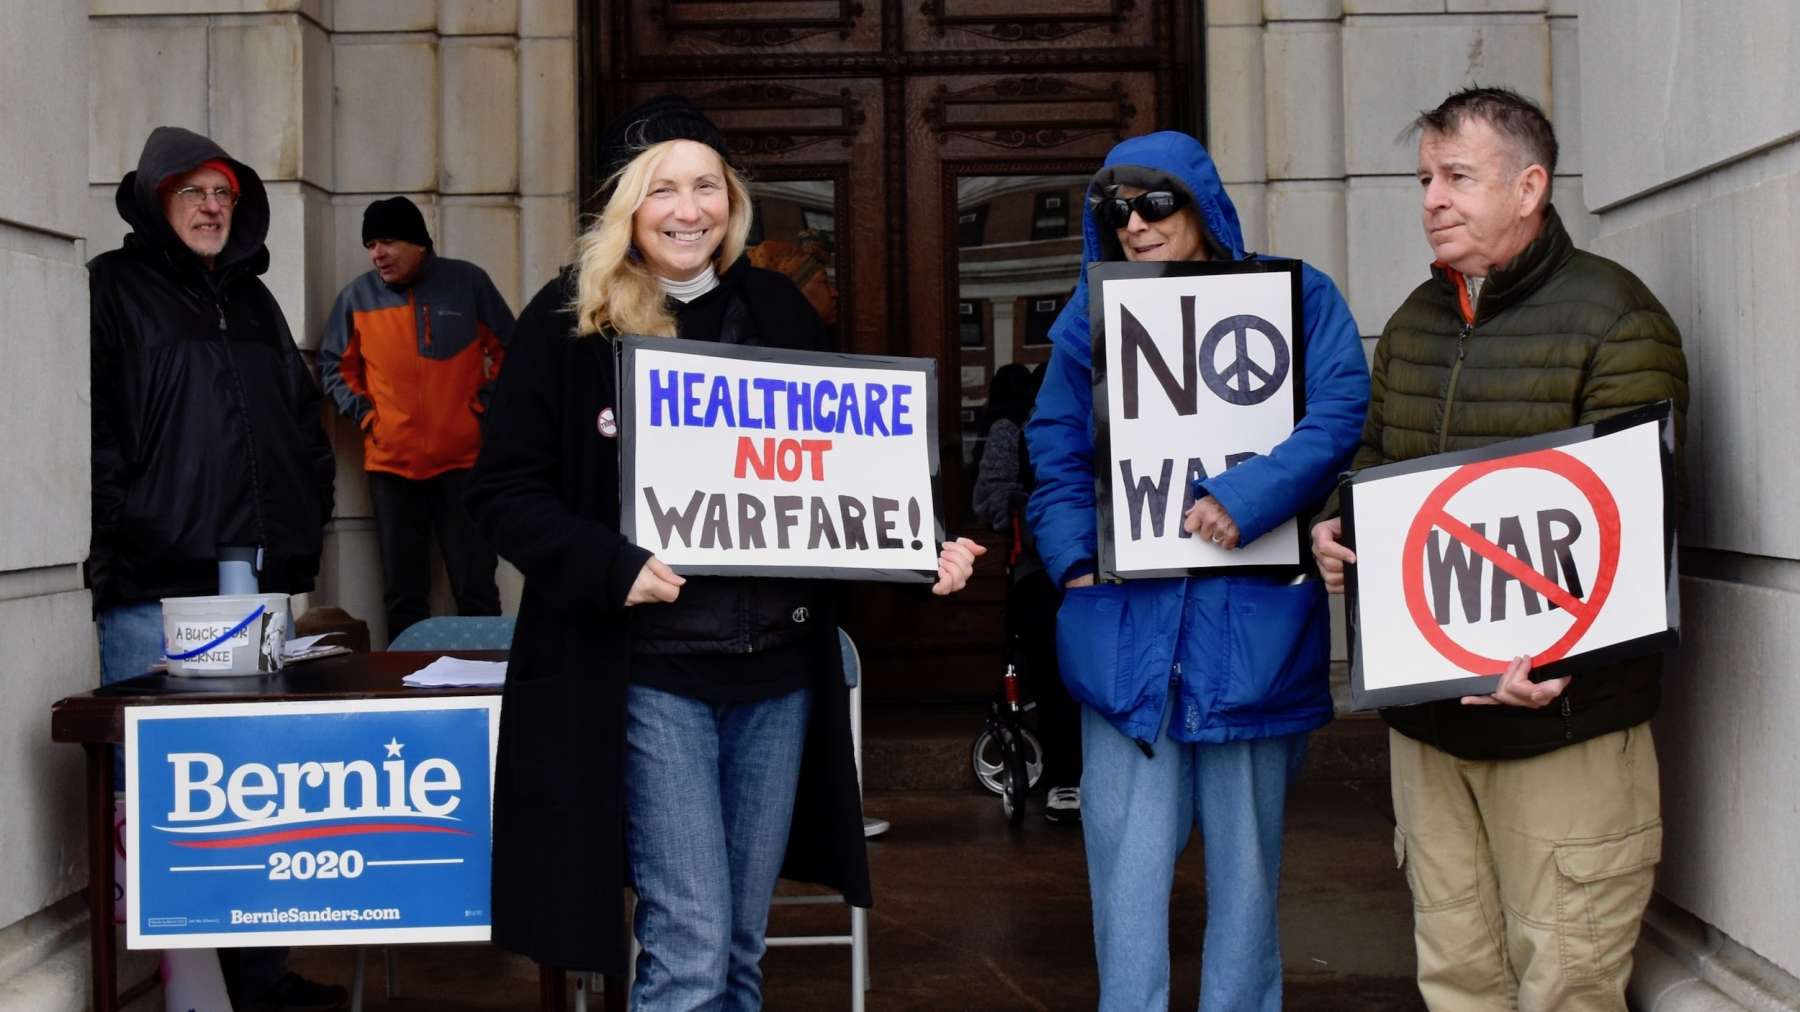 Rhode Island News: Peace coalition demands No War with Iran at State House event